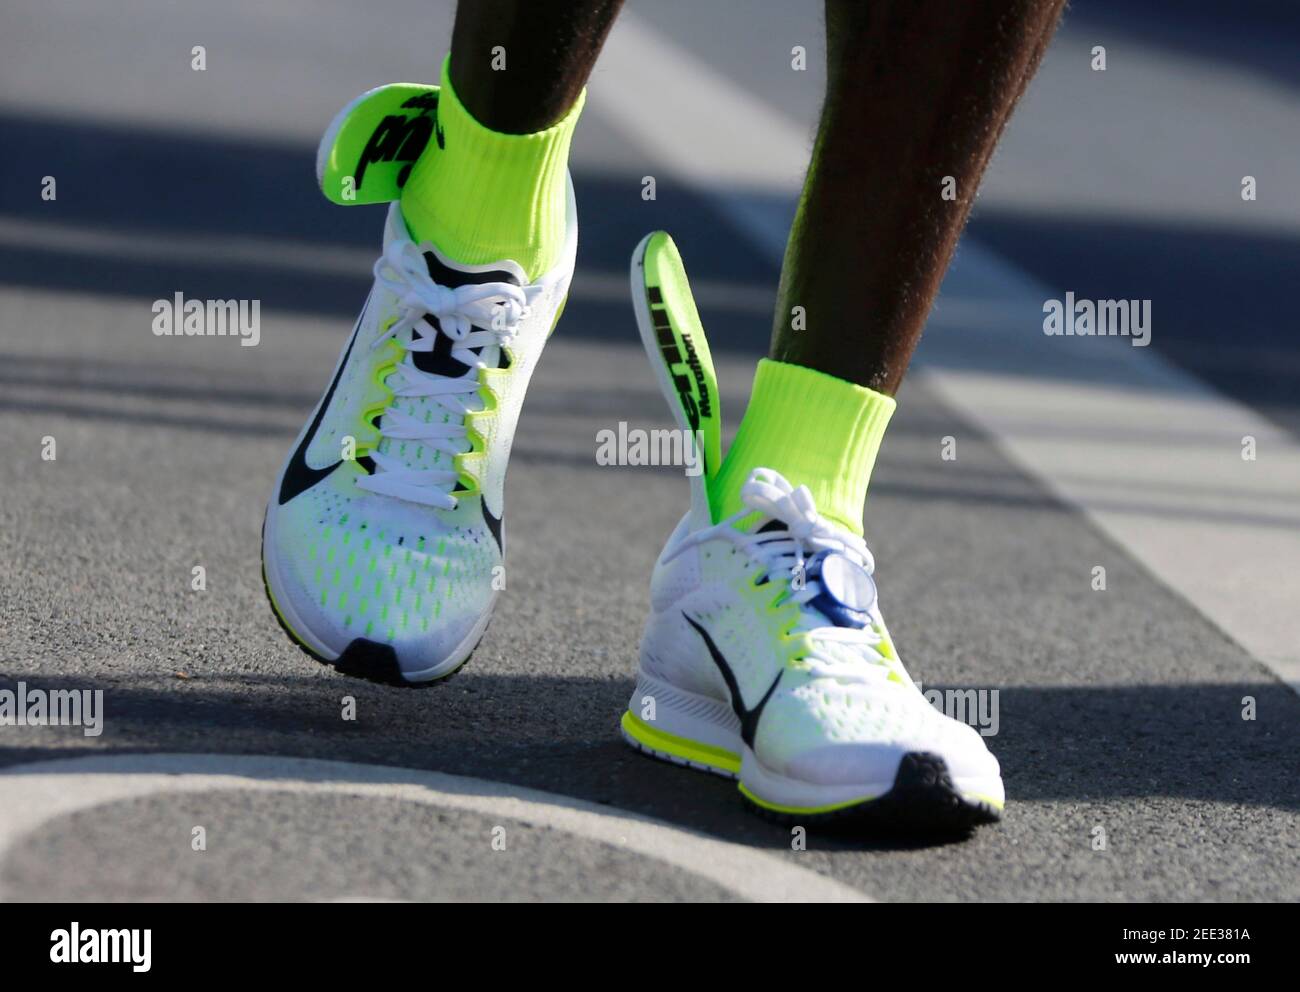 The insoles of Kenya's Eliud Kipchoge's running shoes are seen slipping up  to his ankles, after he crosses the finish line to win the men's 42nd  Berlin marathon, in Berlin, Germany September